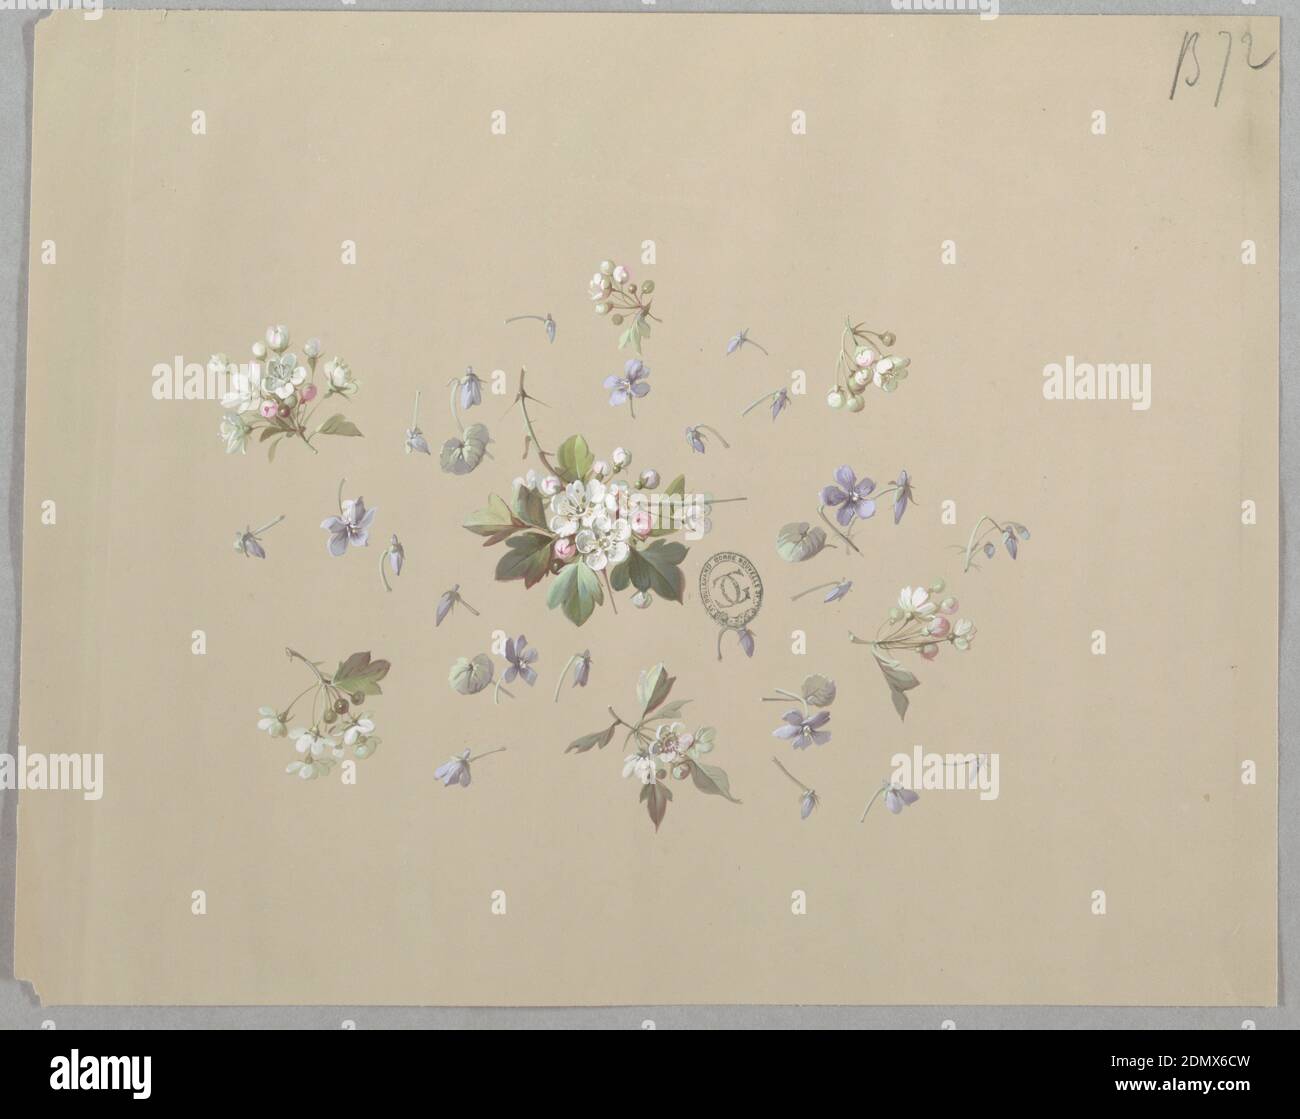 Design for Wallpaper and Textiles: Flowers, Brush and gouache on cream paper, Cluster of white flowers and foliage at center of page surrounded by single flowers in a light purple gray shade. Surrounding this, six smaller clusters of white flowers and foliage, forming a horizontal oval shape., France, 19th century, wallpaper designs, Drawing Stock Photo